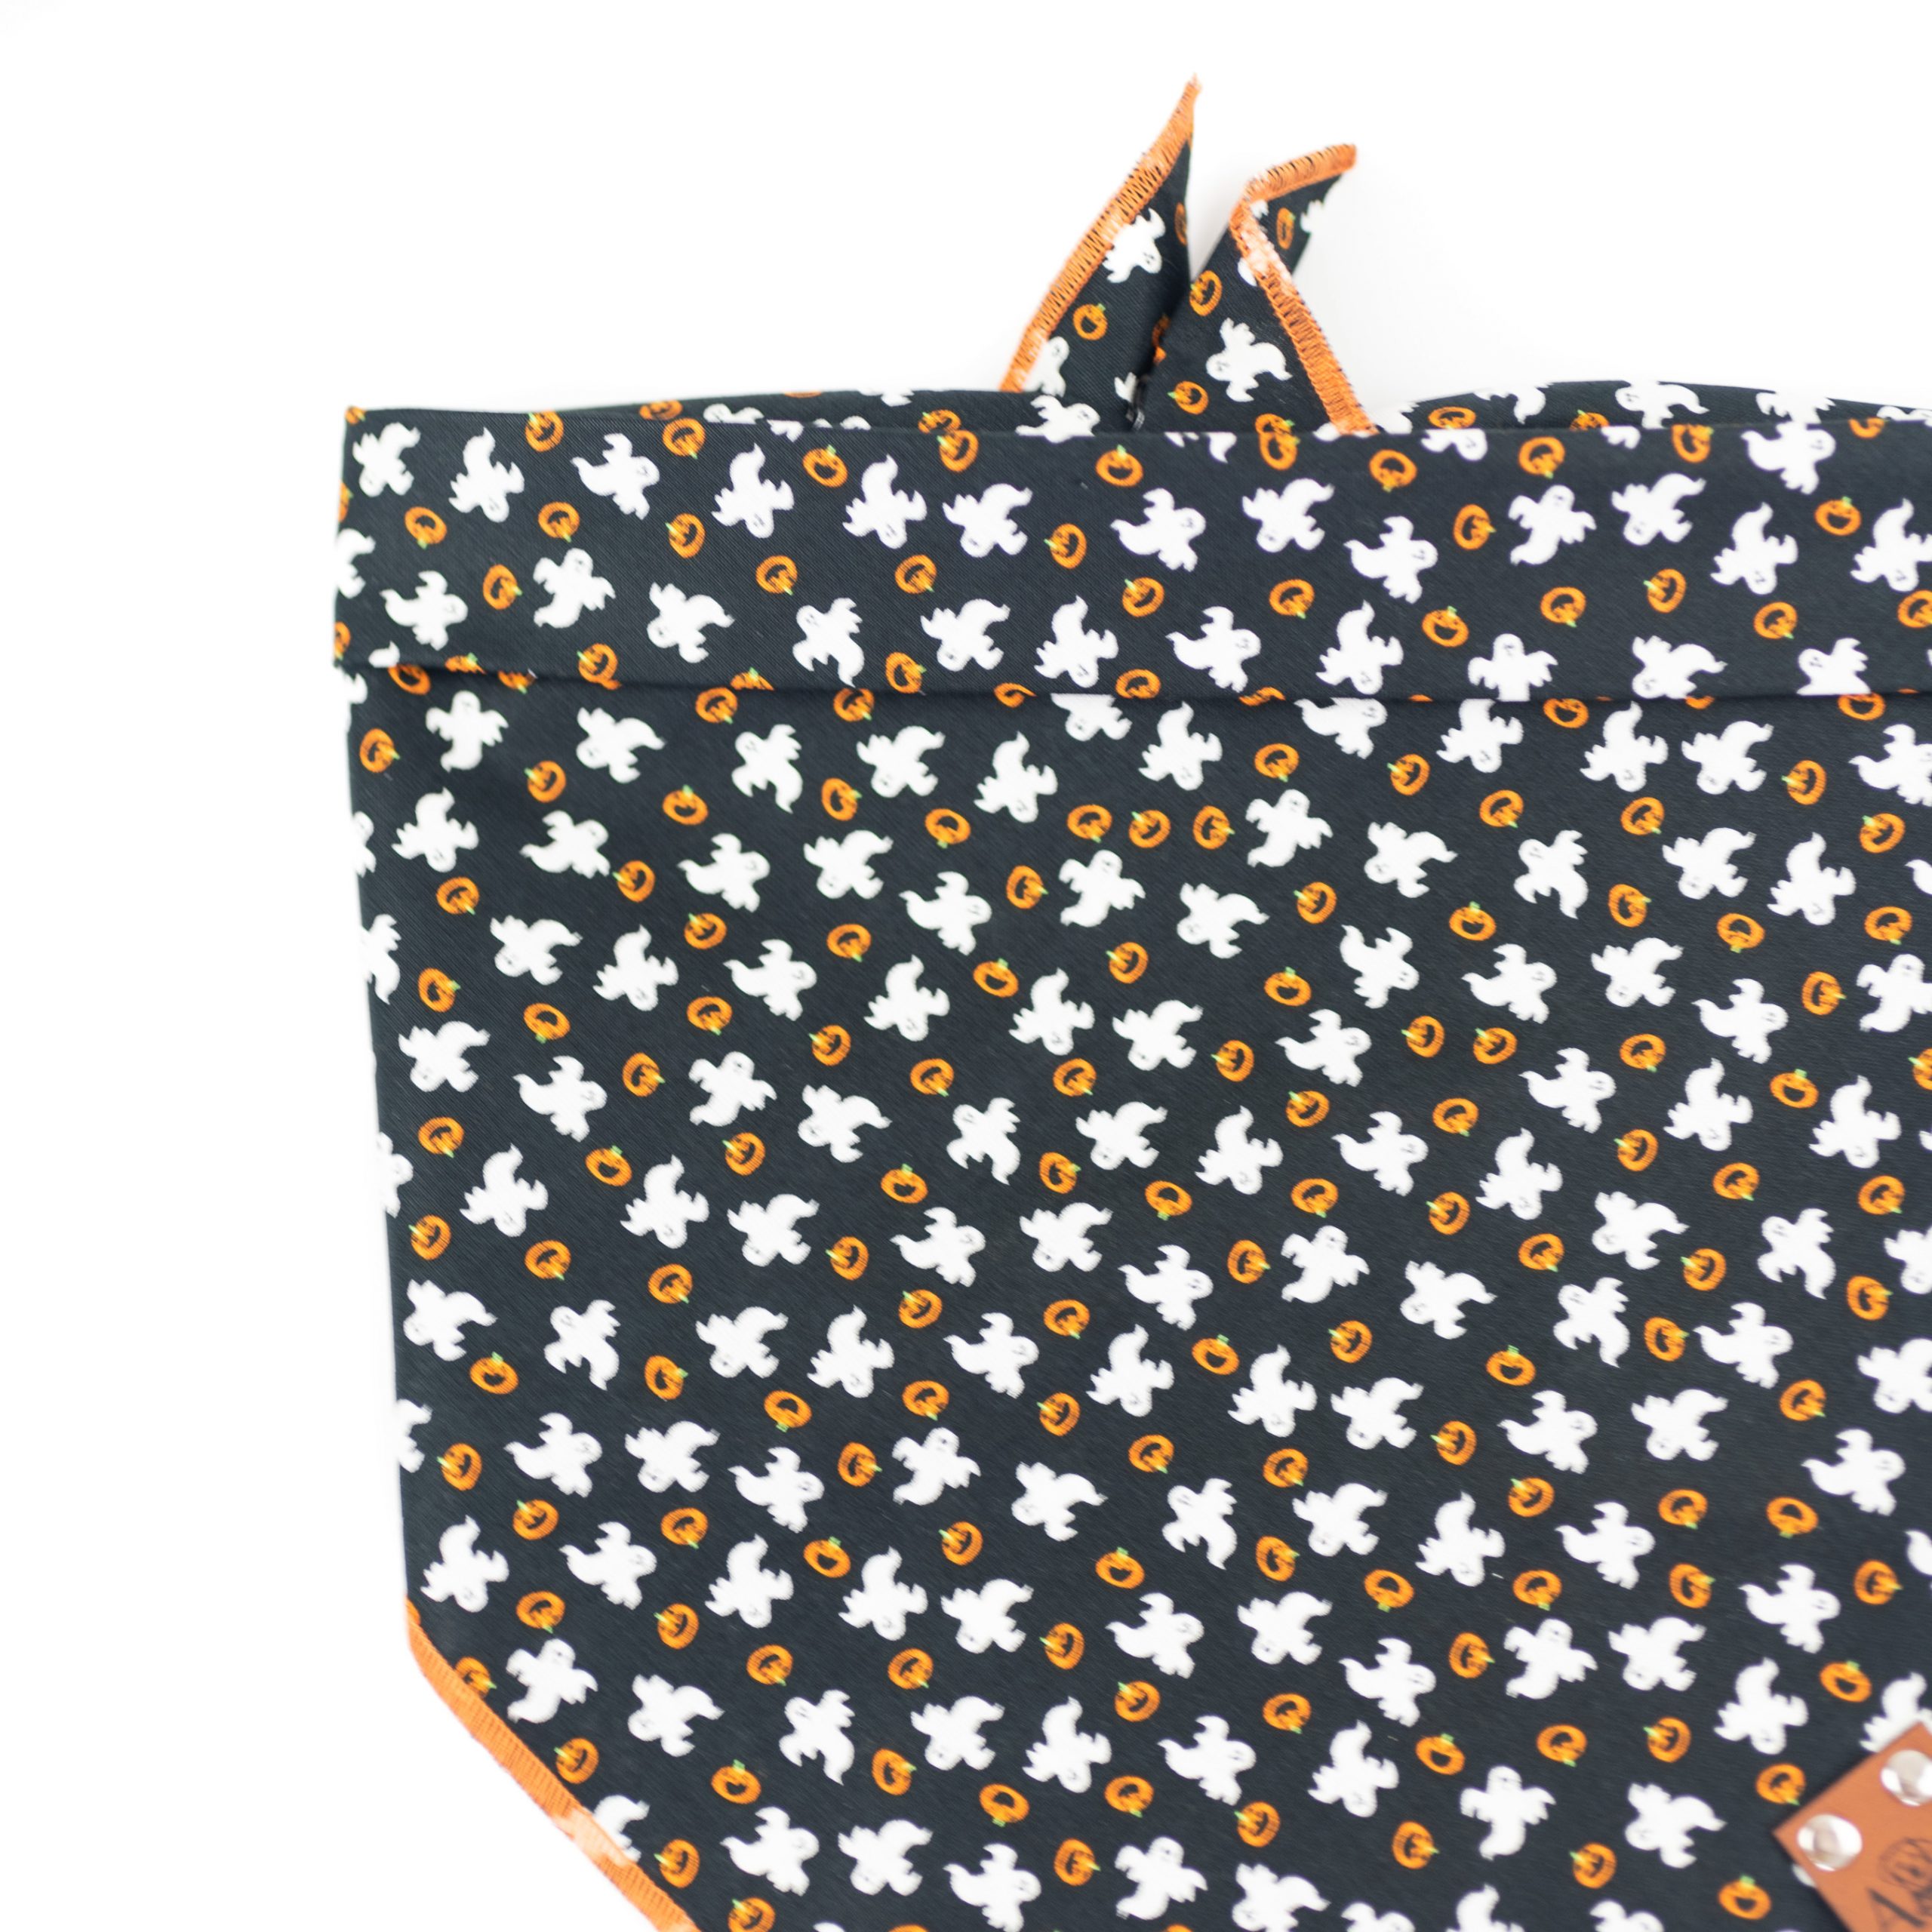 Black Dog Bandana with white ghosts and orange pumpkins for halloween